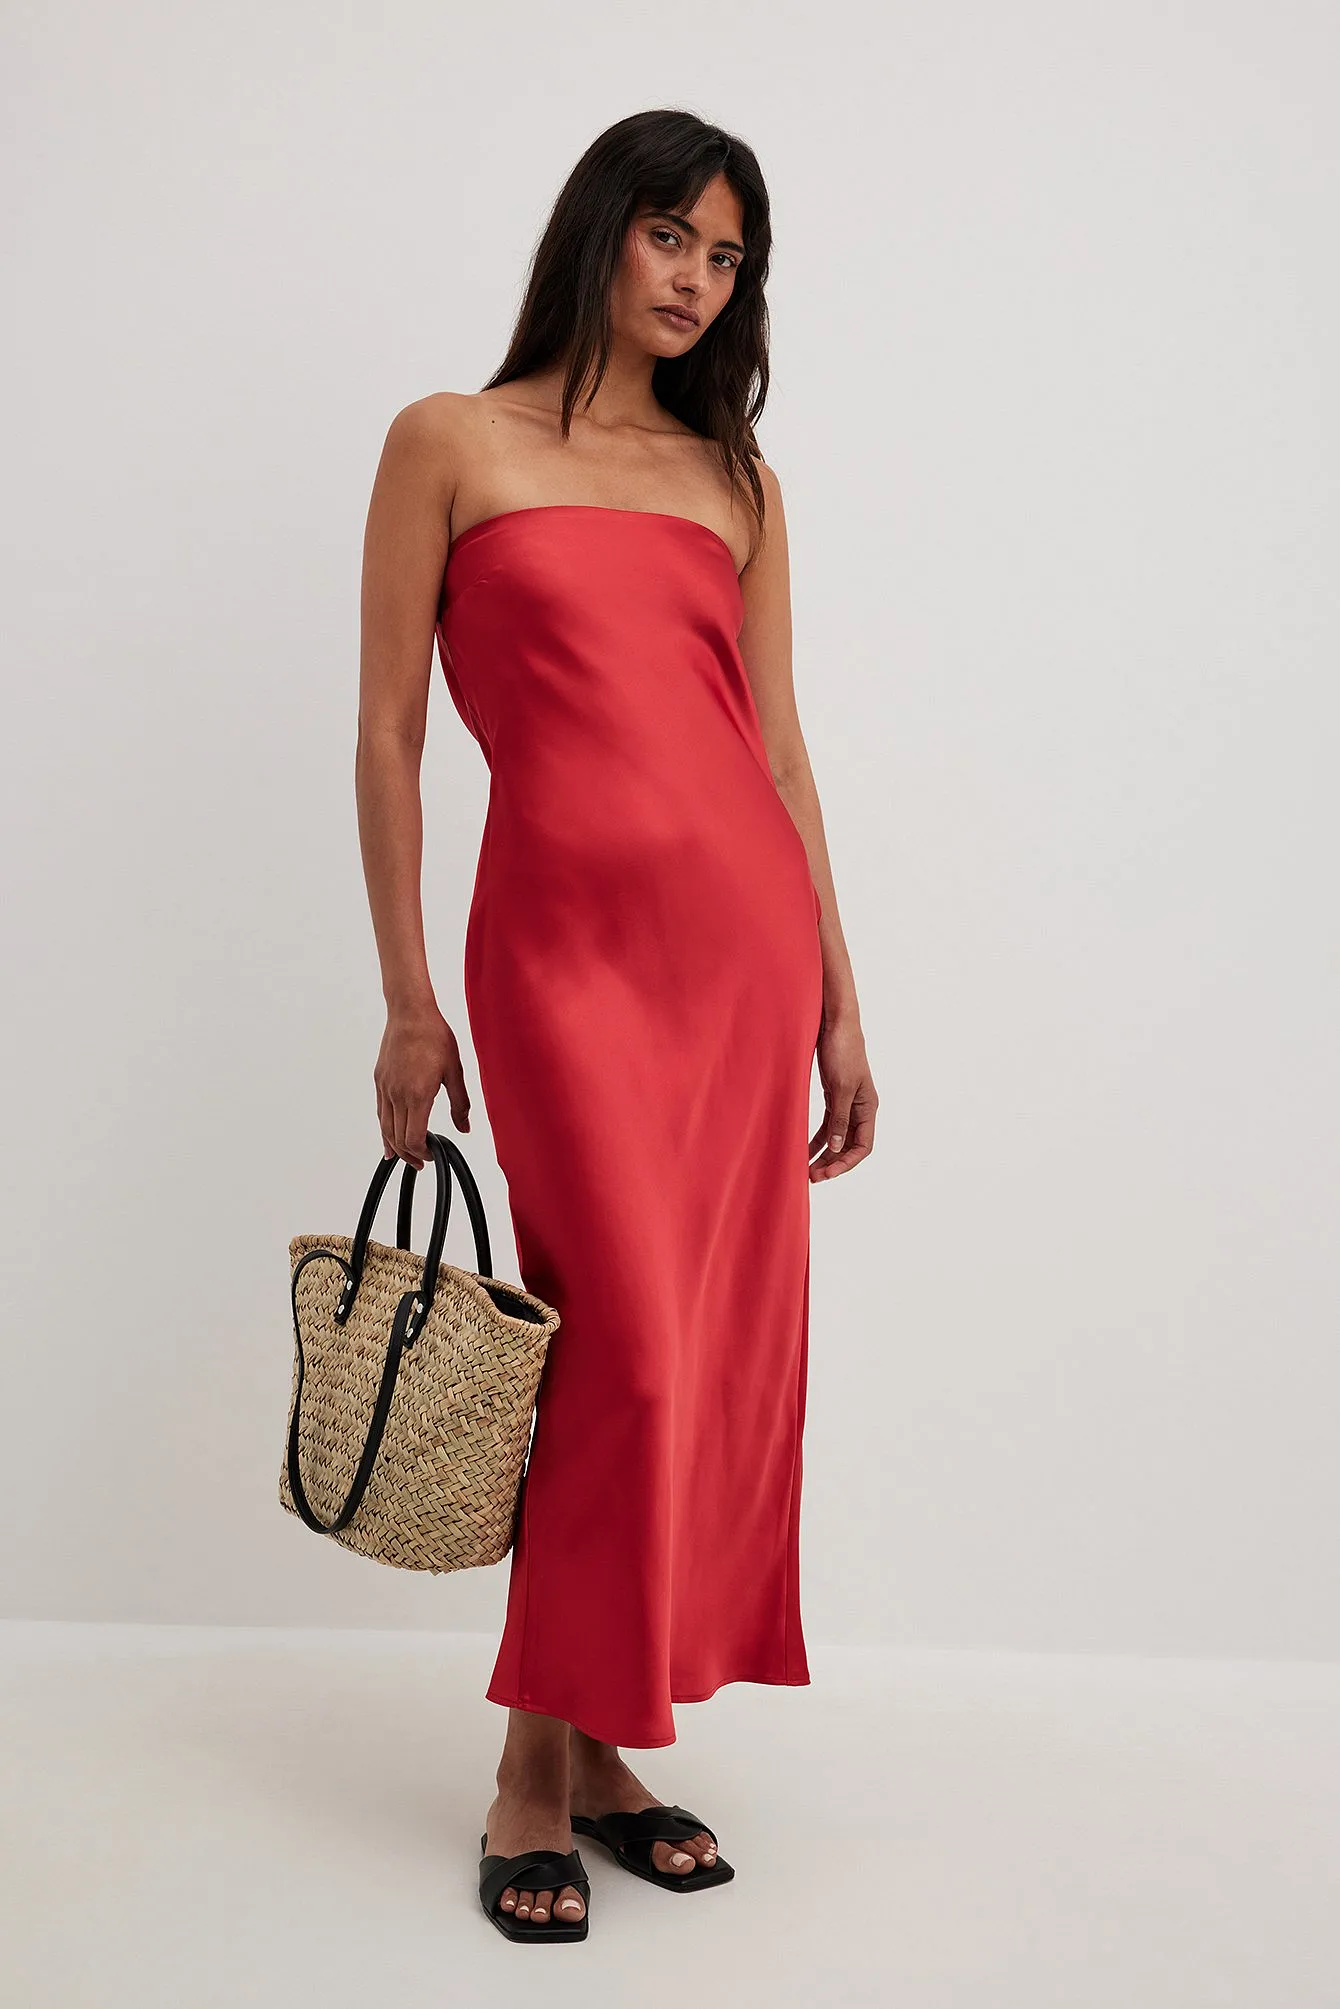 https://www.na-kd.com/globalassets/magazine/what-colour-shoes-with-a-red-dress-a-styling-guide/satin_bandeau_midi_dress-1795-000031-00044495_01c.jpg?ref=01F693AEF7